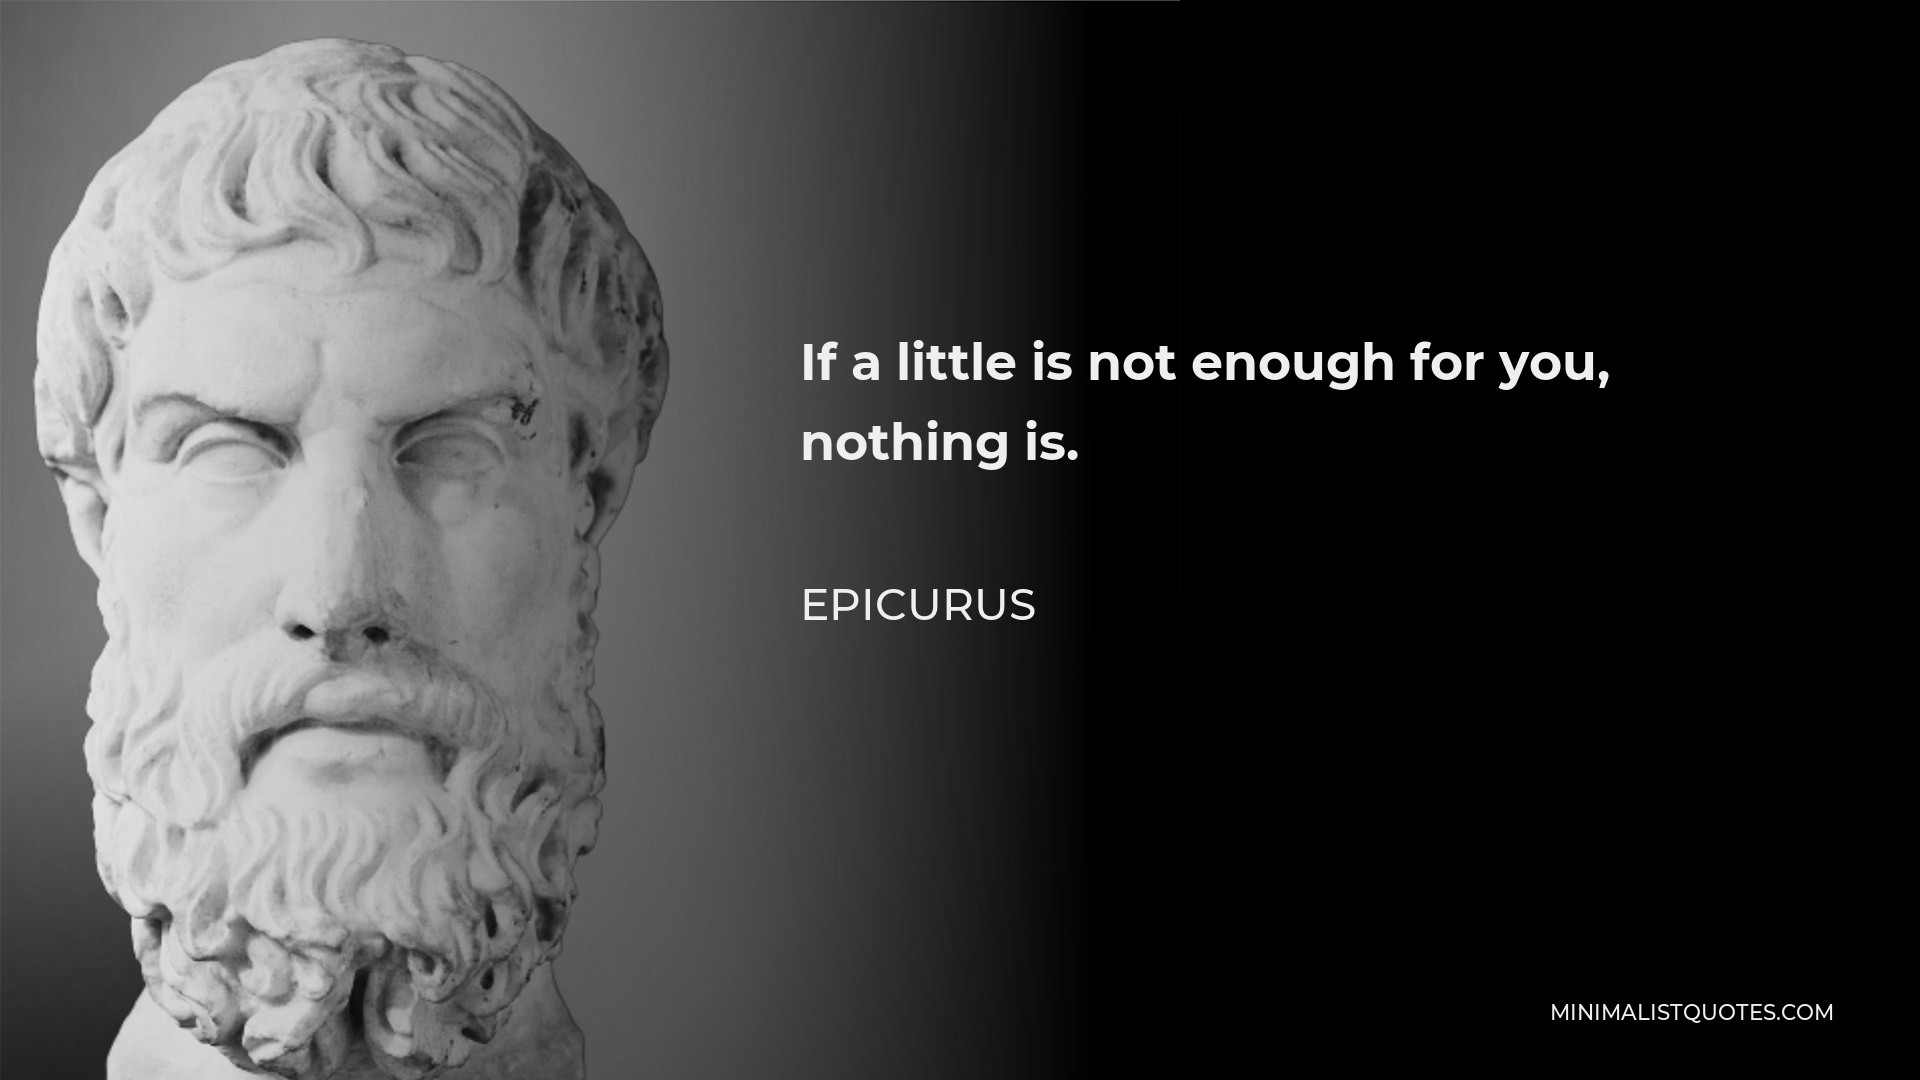 Epicurus Quote - If a little is not enough for you, nothing is.